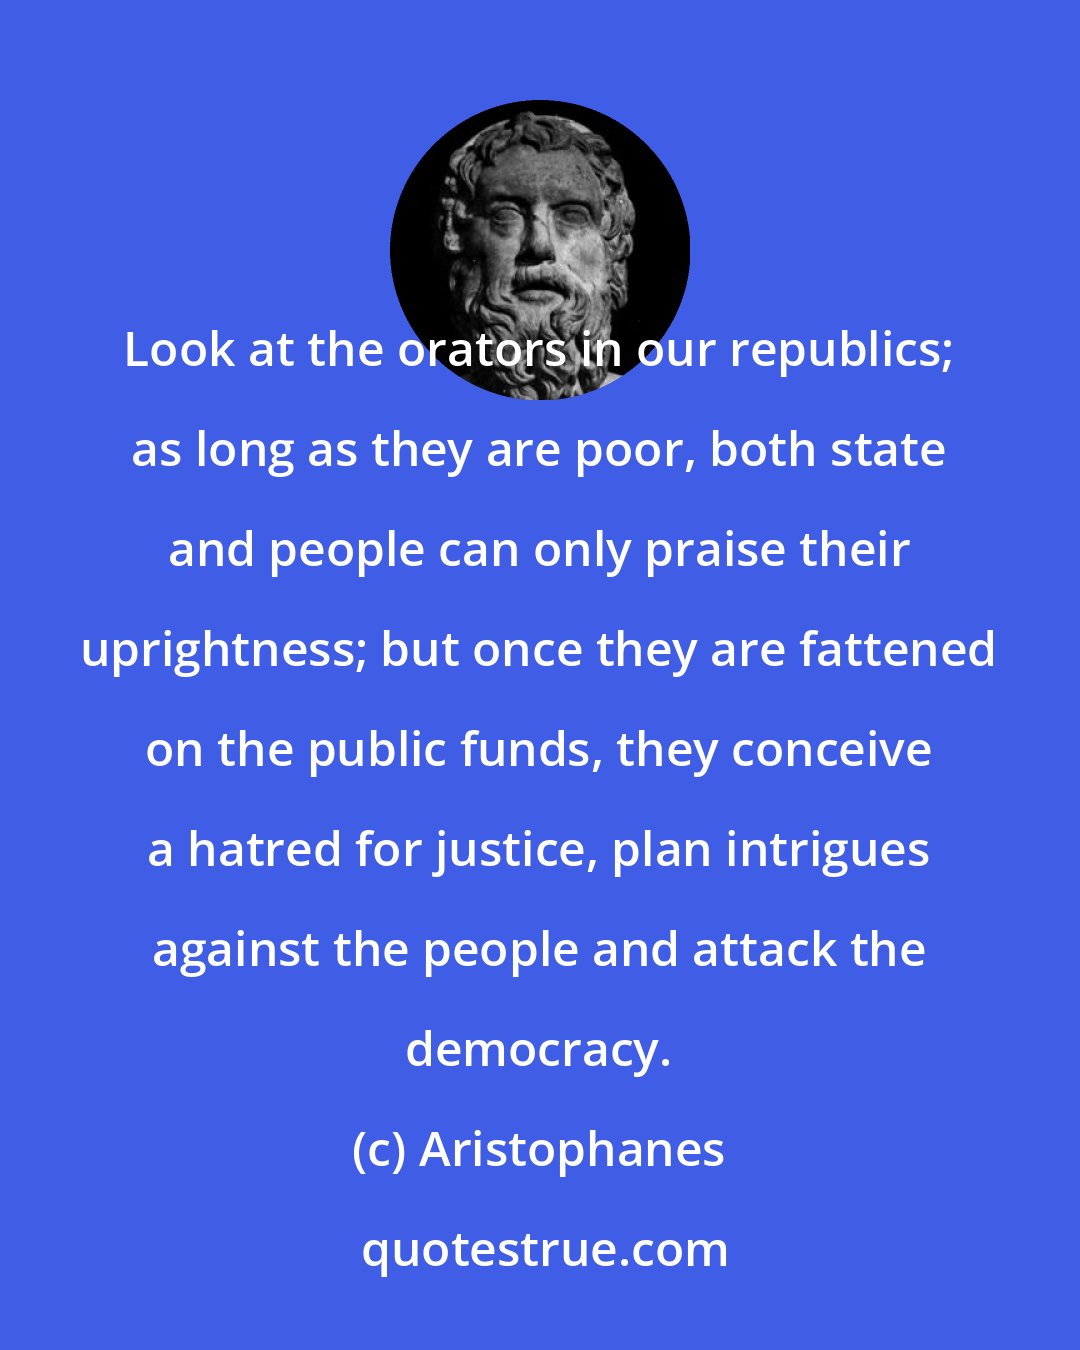 Aristophanes: Look at the orators in our republics; as long as they are poor, both state and people can only praise their uprightness; but once they are fattened on the public funds, they conceive a hatred for justice, plan intrigues against the people and attack the democracy.